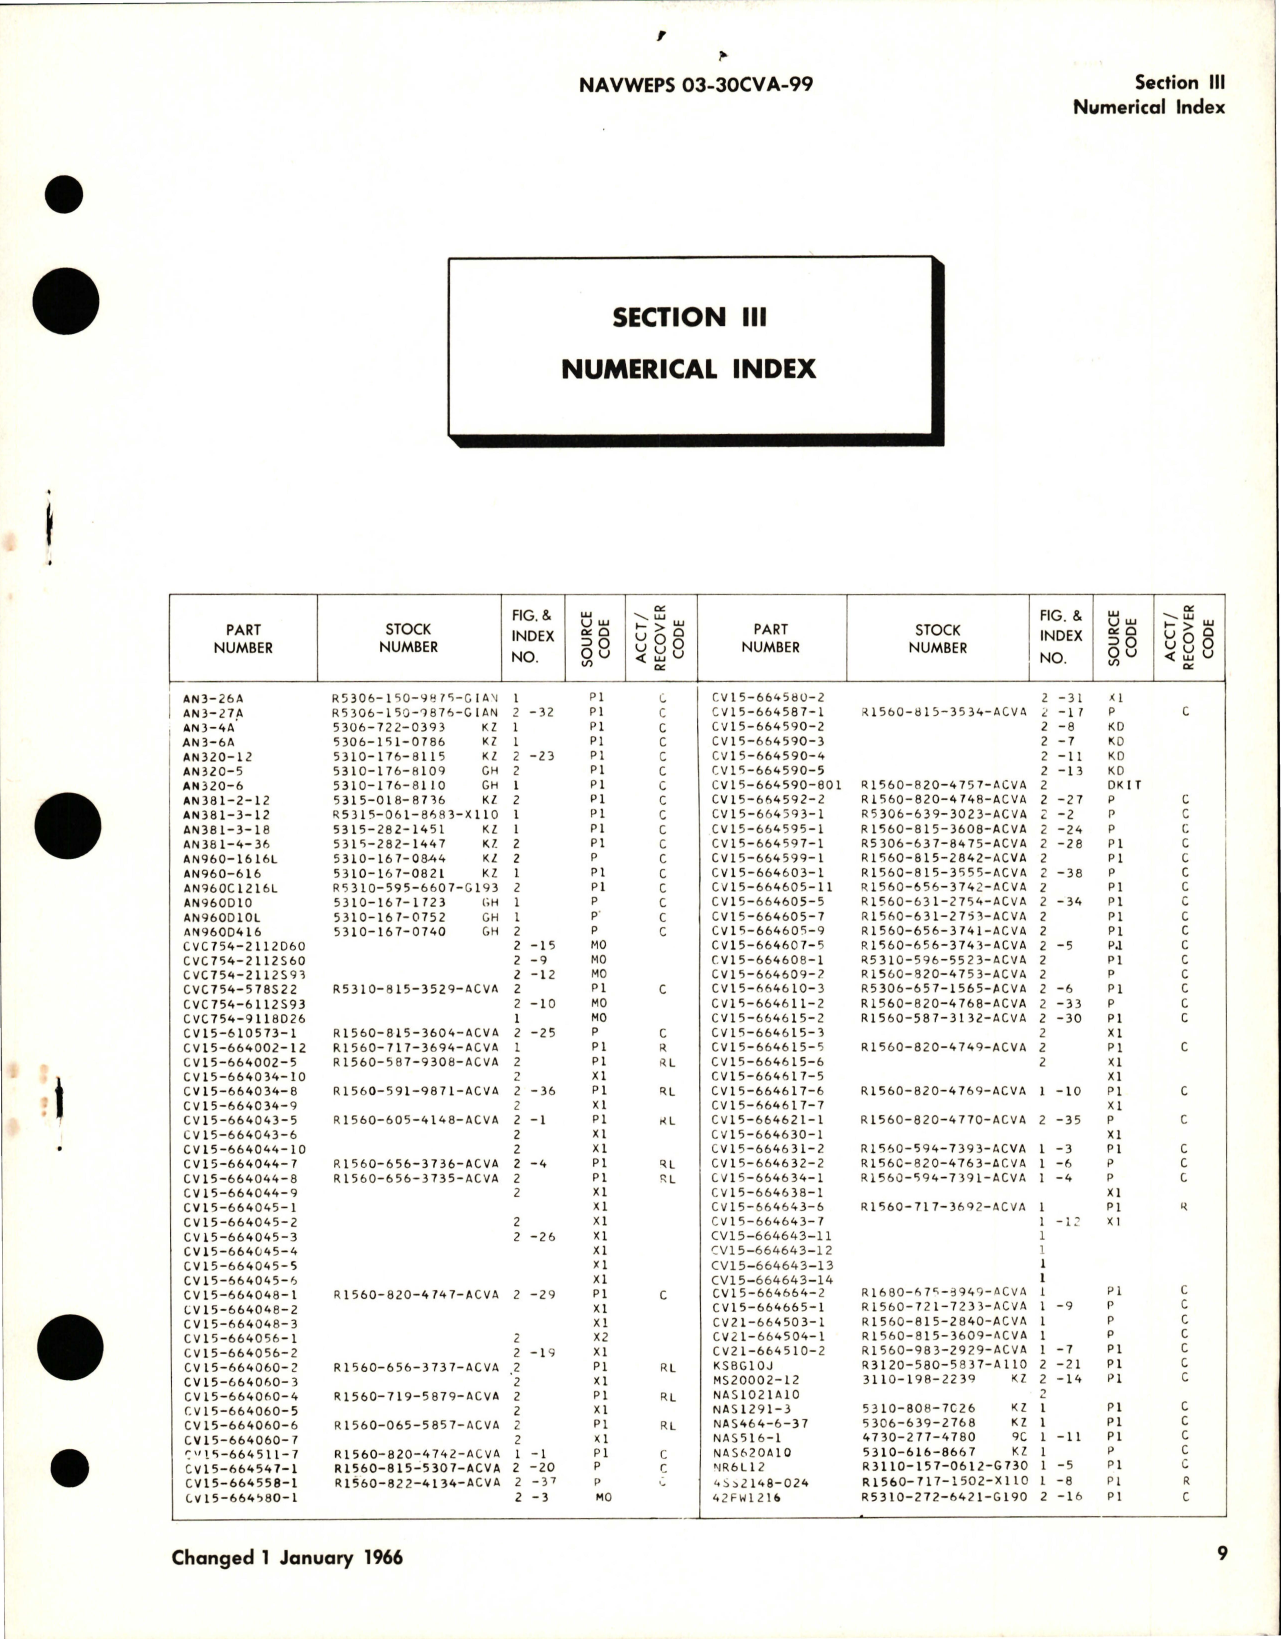 Sample page 5 from AirCorps Library document: Illustrated Parts Breakdown for Arresting Gear Assembly - Part CV15-664002-12